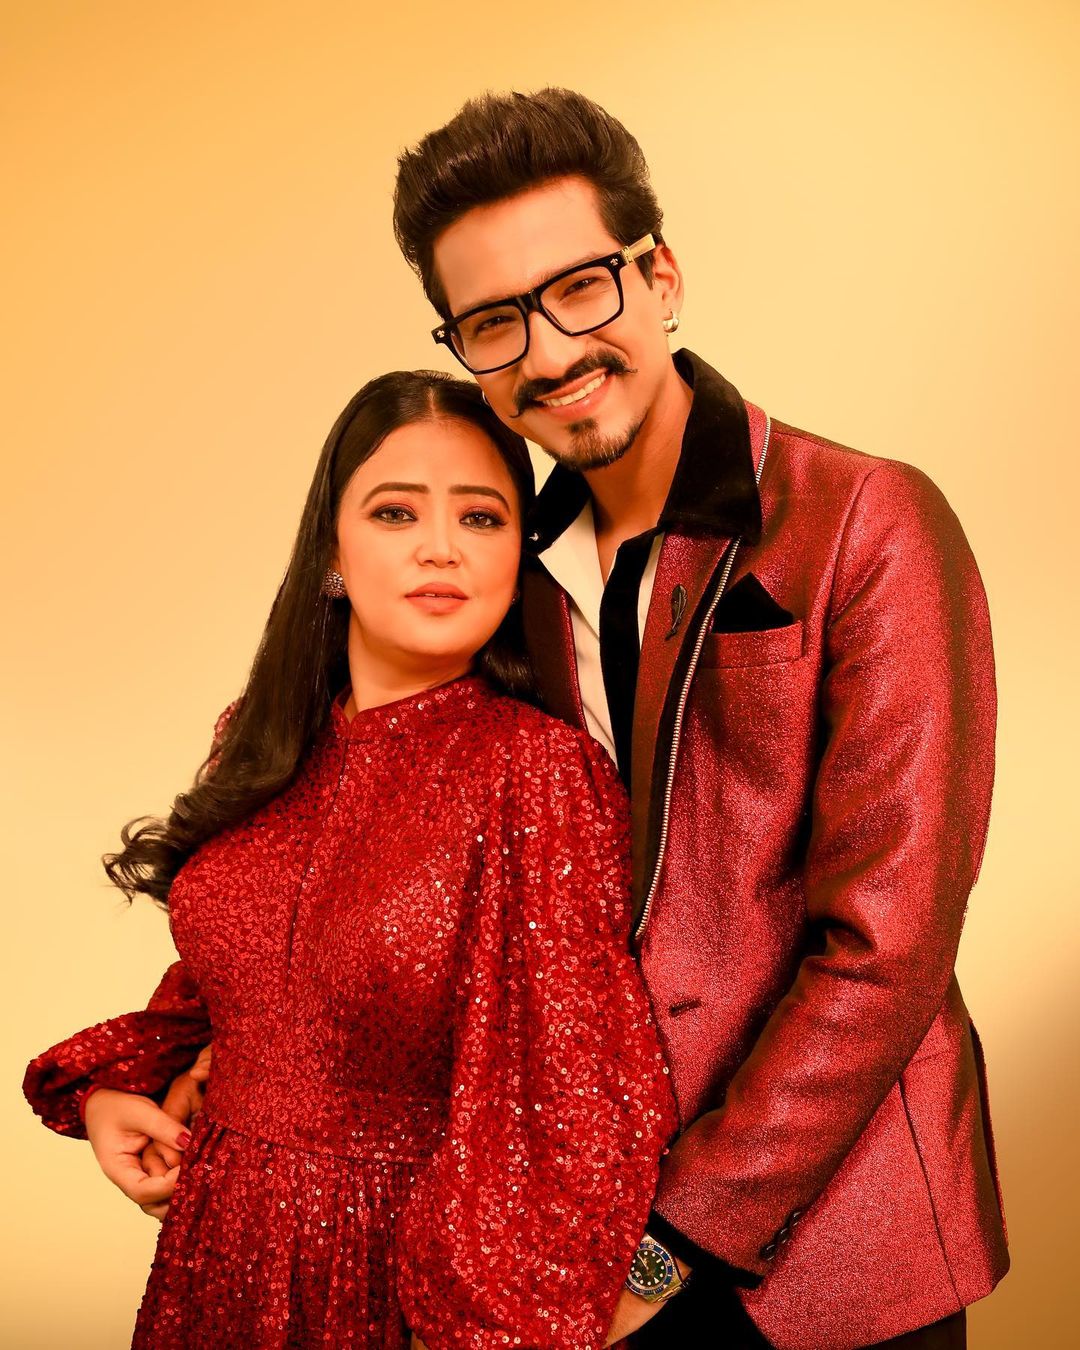 Bharti Singh and her husband Haarsh Limbachiyaa are loved by all. They have been an excellent host couple. (Image: Instagram)